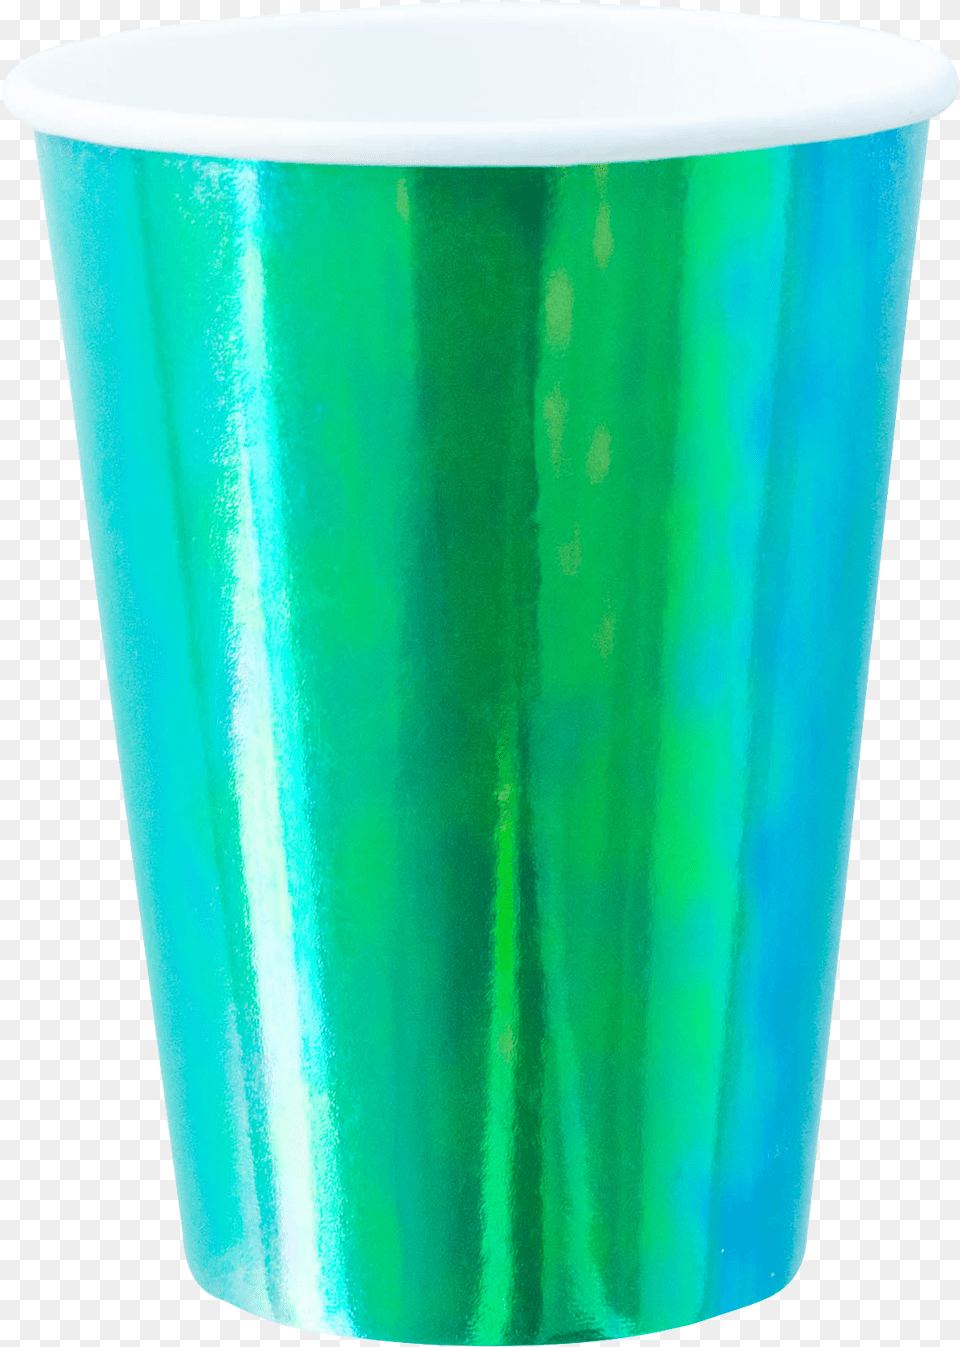 Pint Glass, Cup, Pottery, Aluminium, Can Png Image